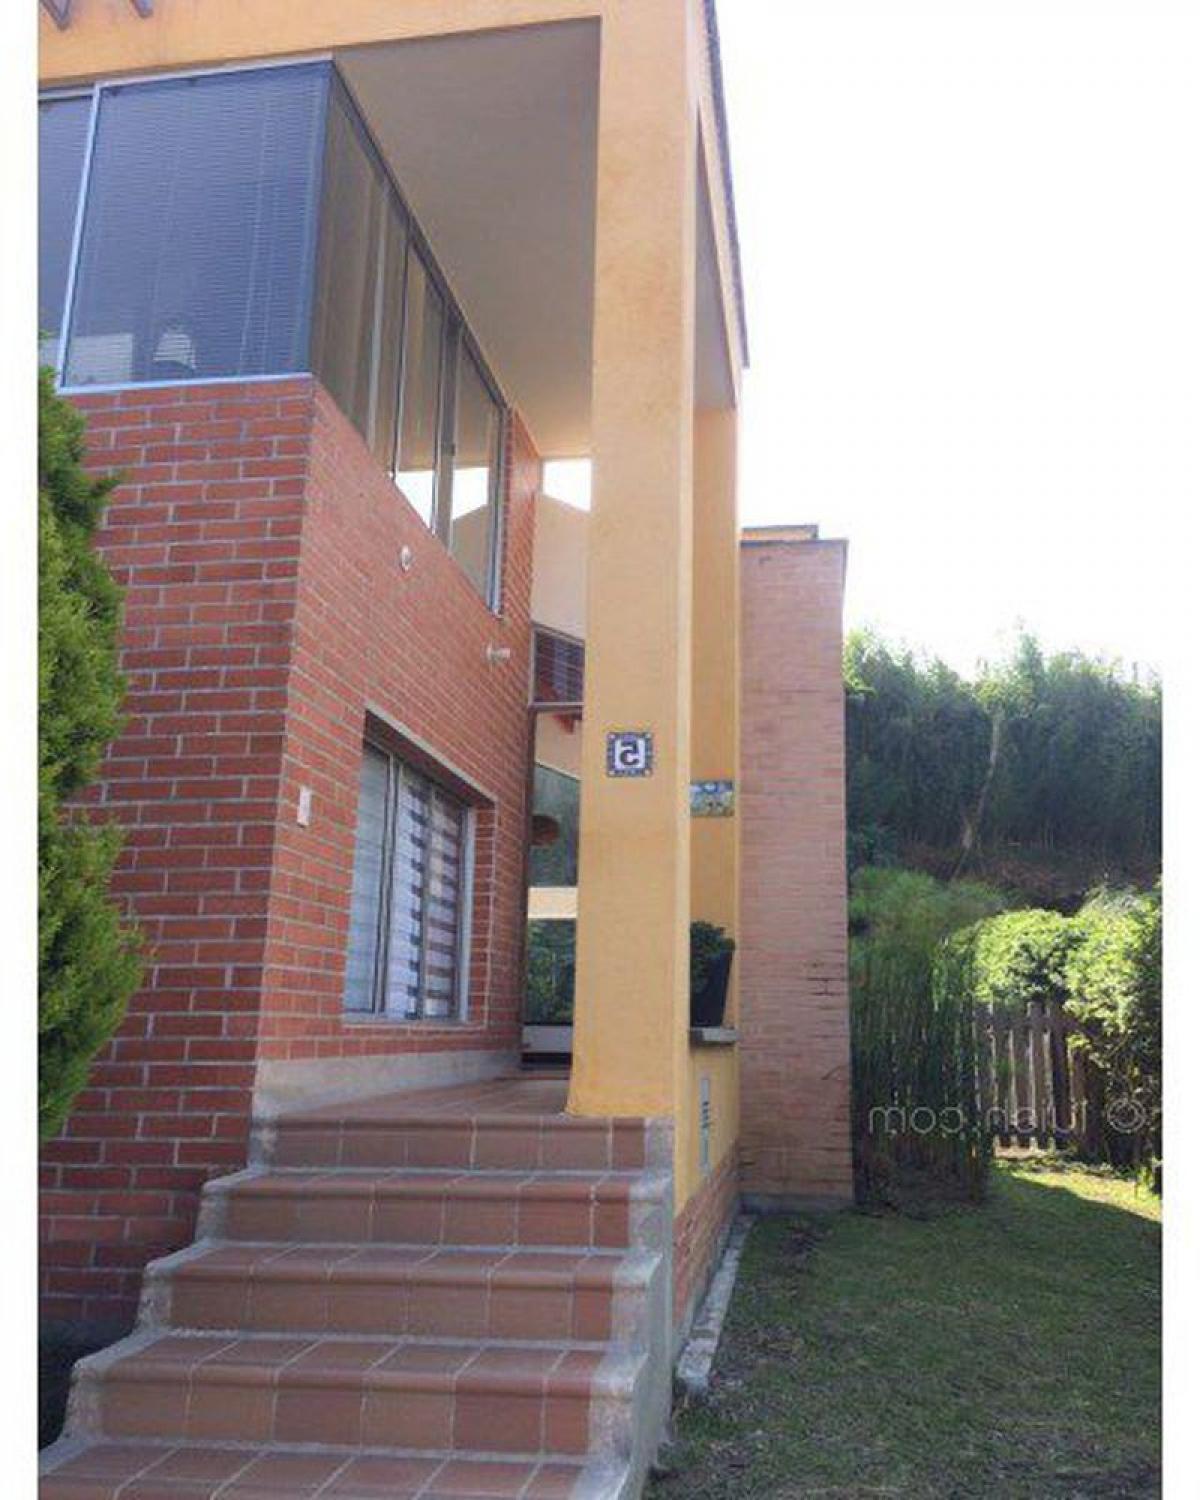 Picture of Home For Sale in Antioquia, Antioquia, Colombia